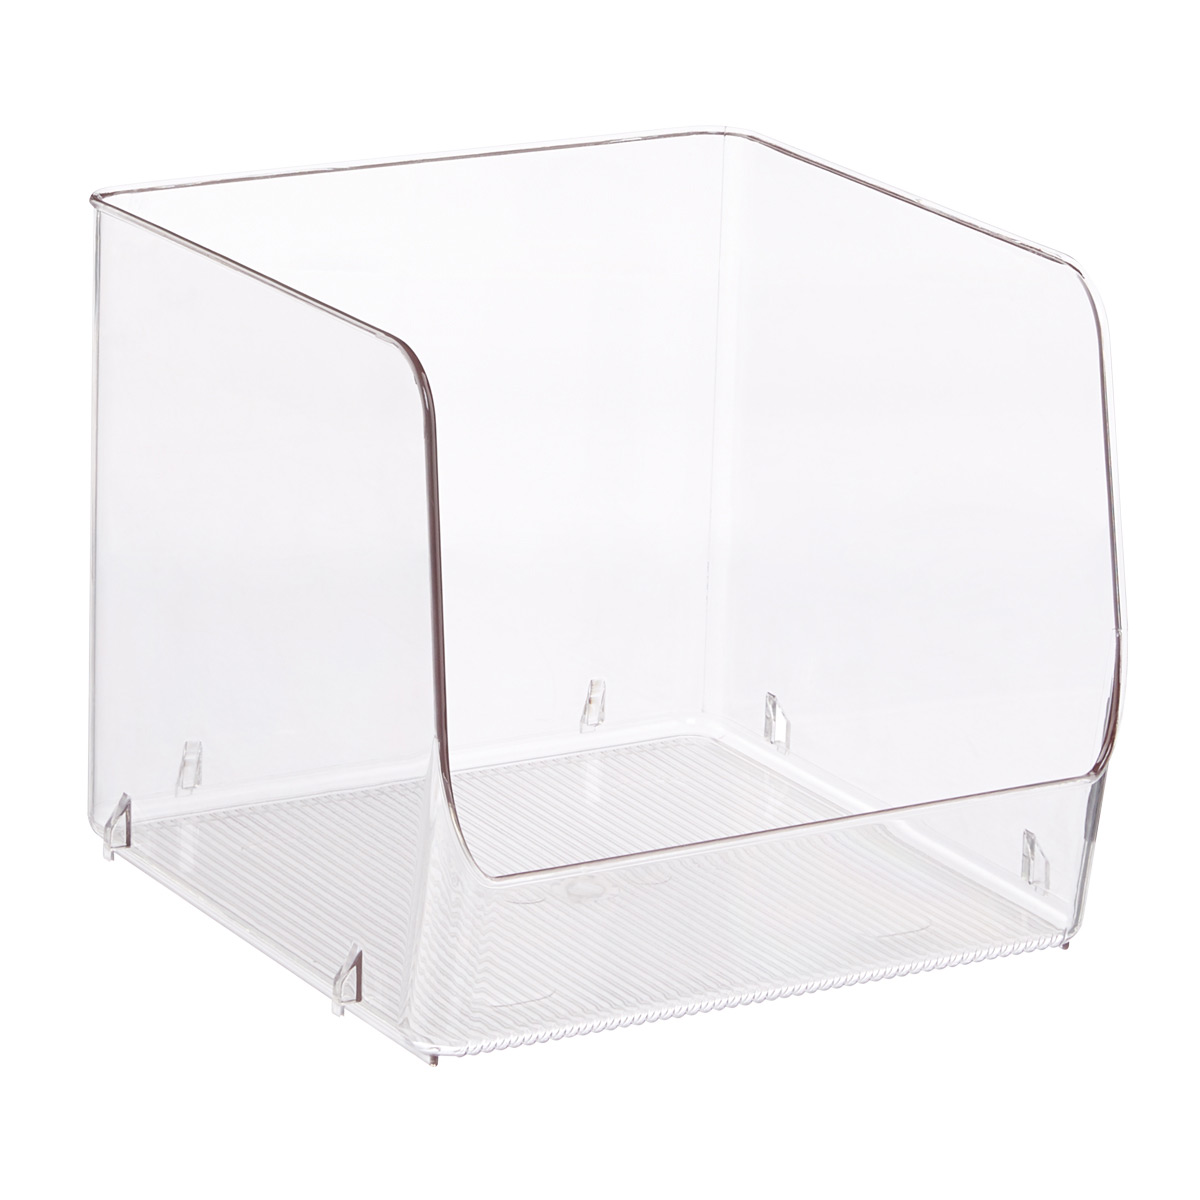 https://www.containerstore.com/catalogimages/407417/10045771-linus_stackable_bin_extra_l.jpg